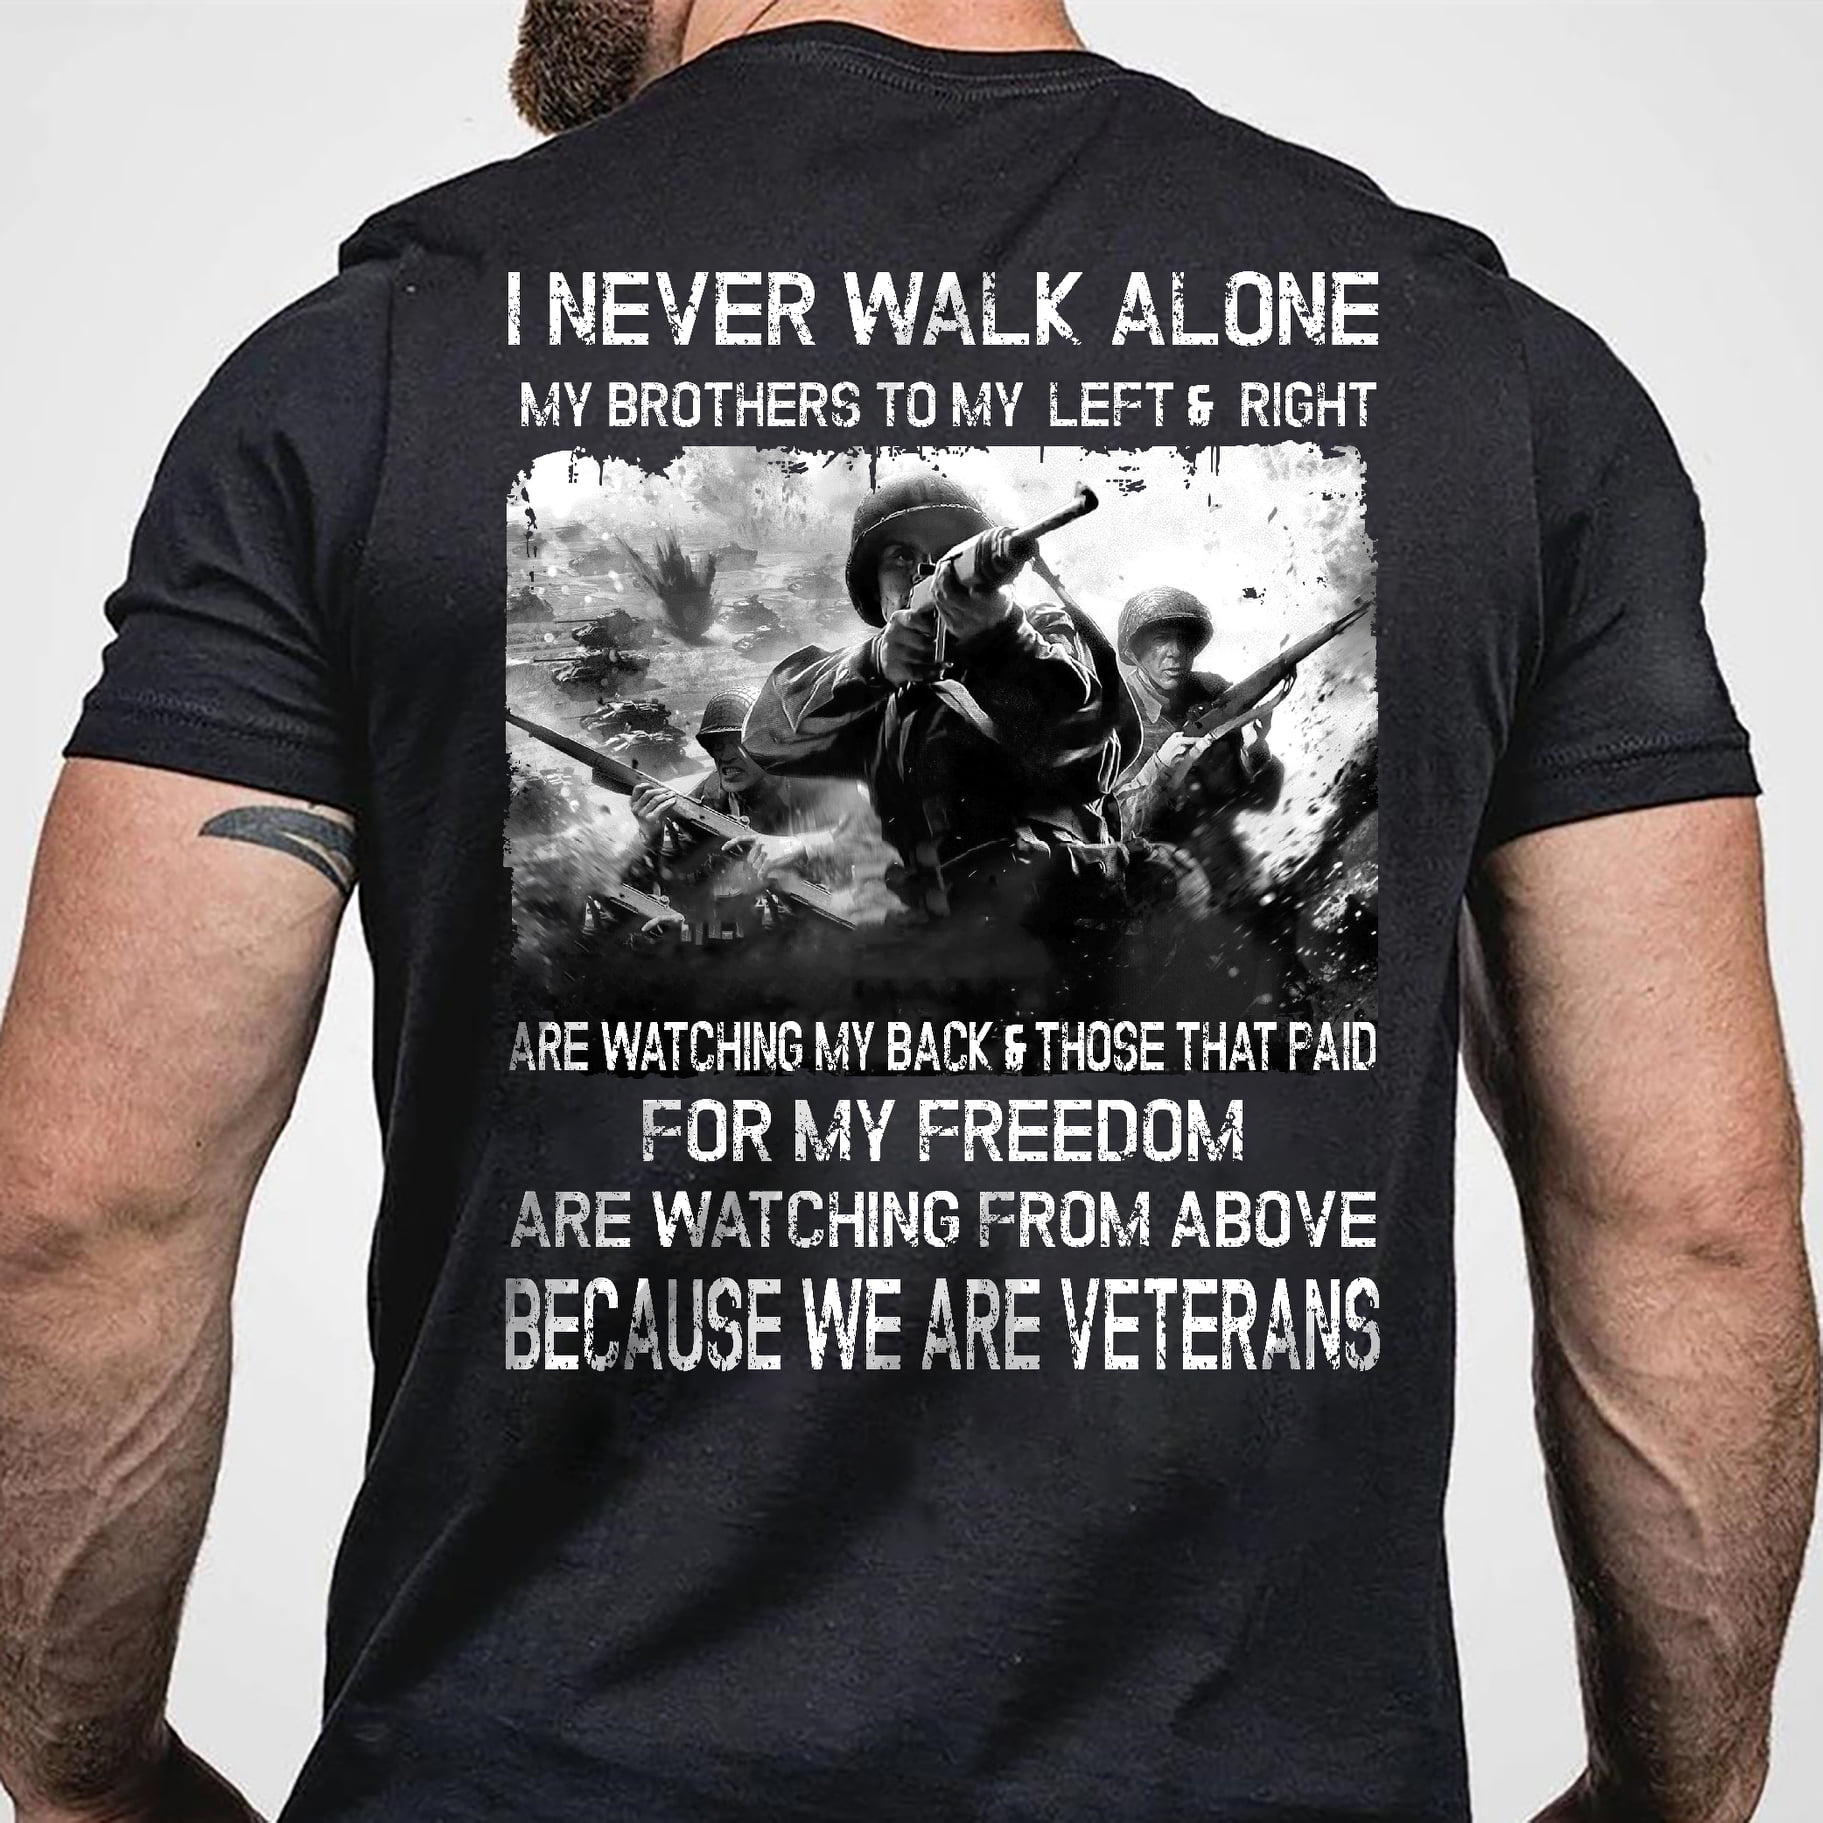 I never walk alone my brother to the left and right, we are veterans - Veteran with guns